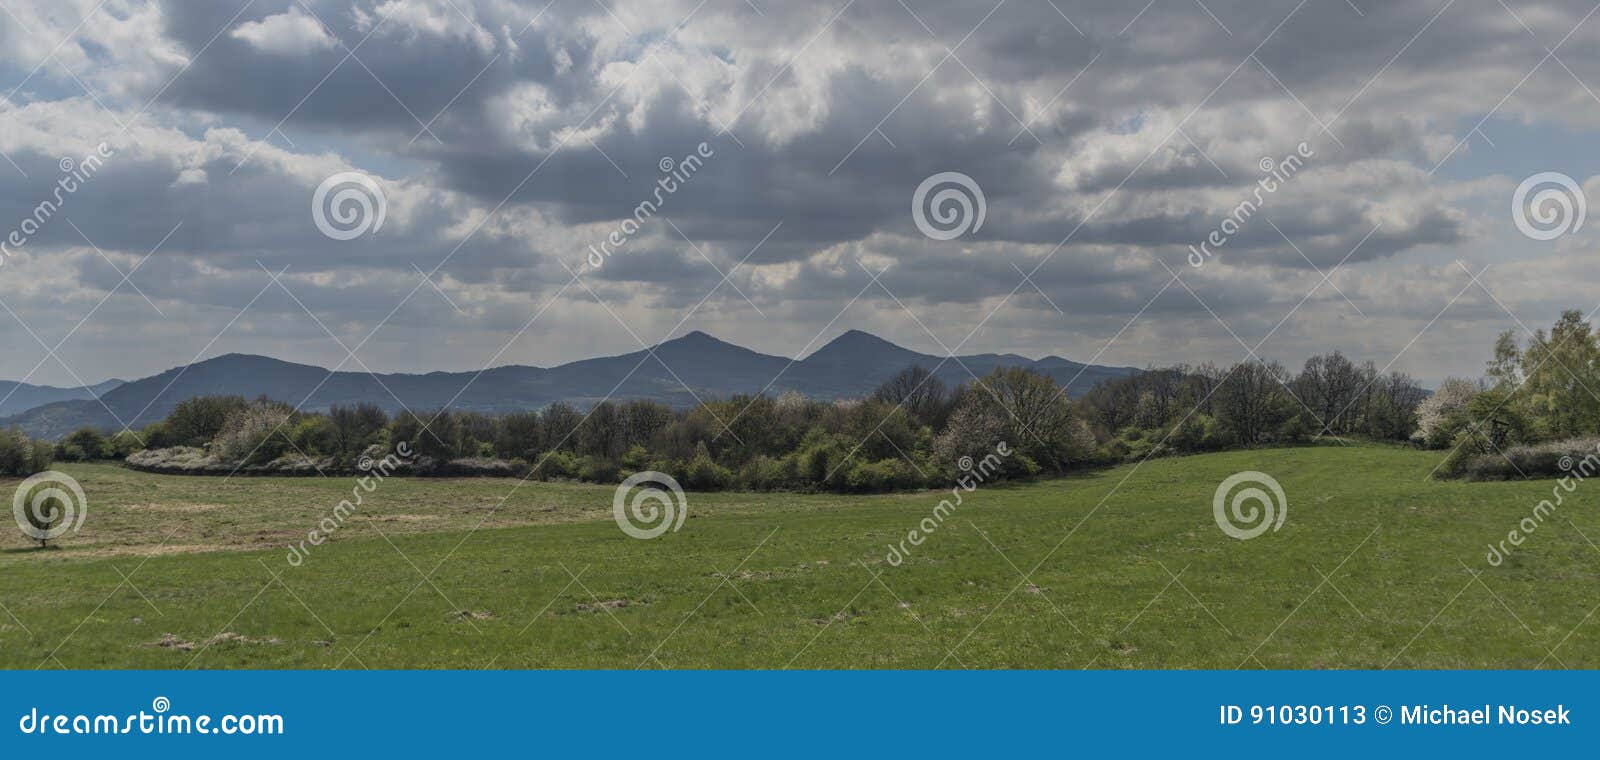 Green Cloudy Day in Ceske Stredohori Mountains Stock Image - Image of ...